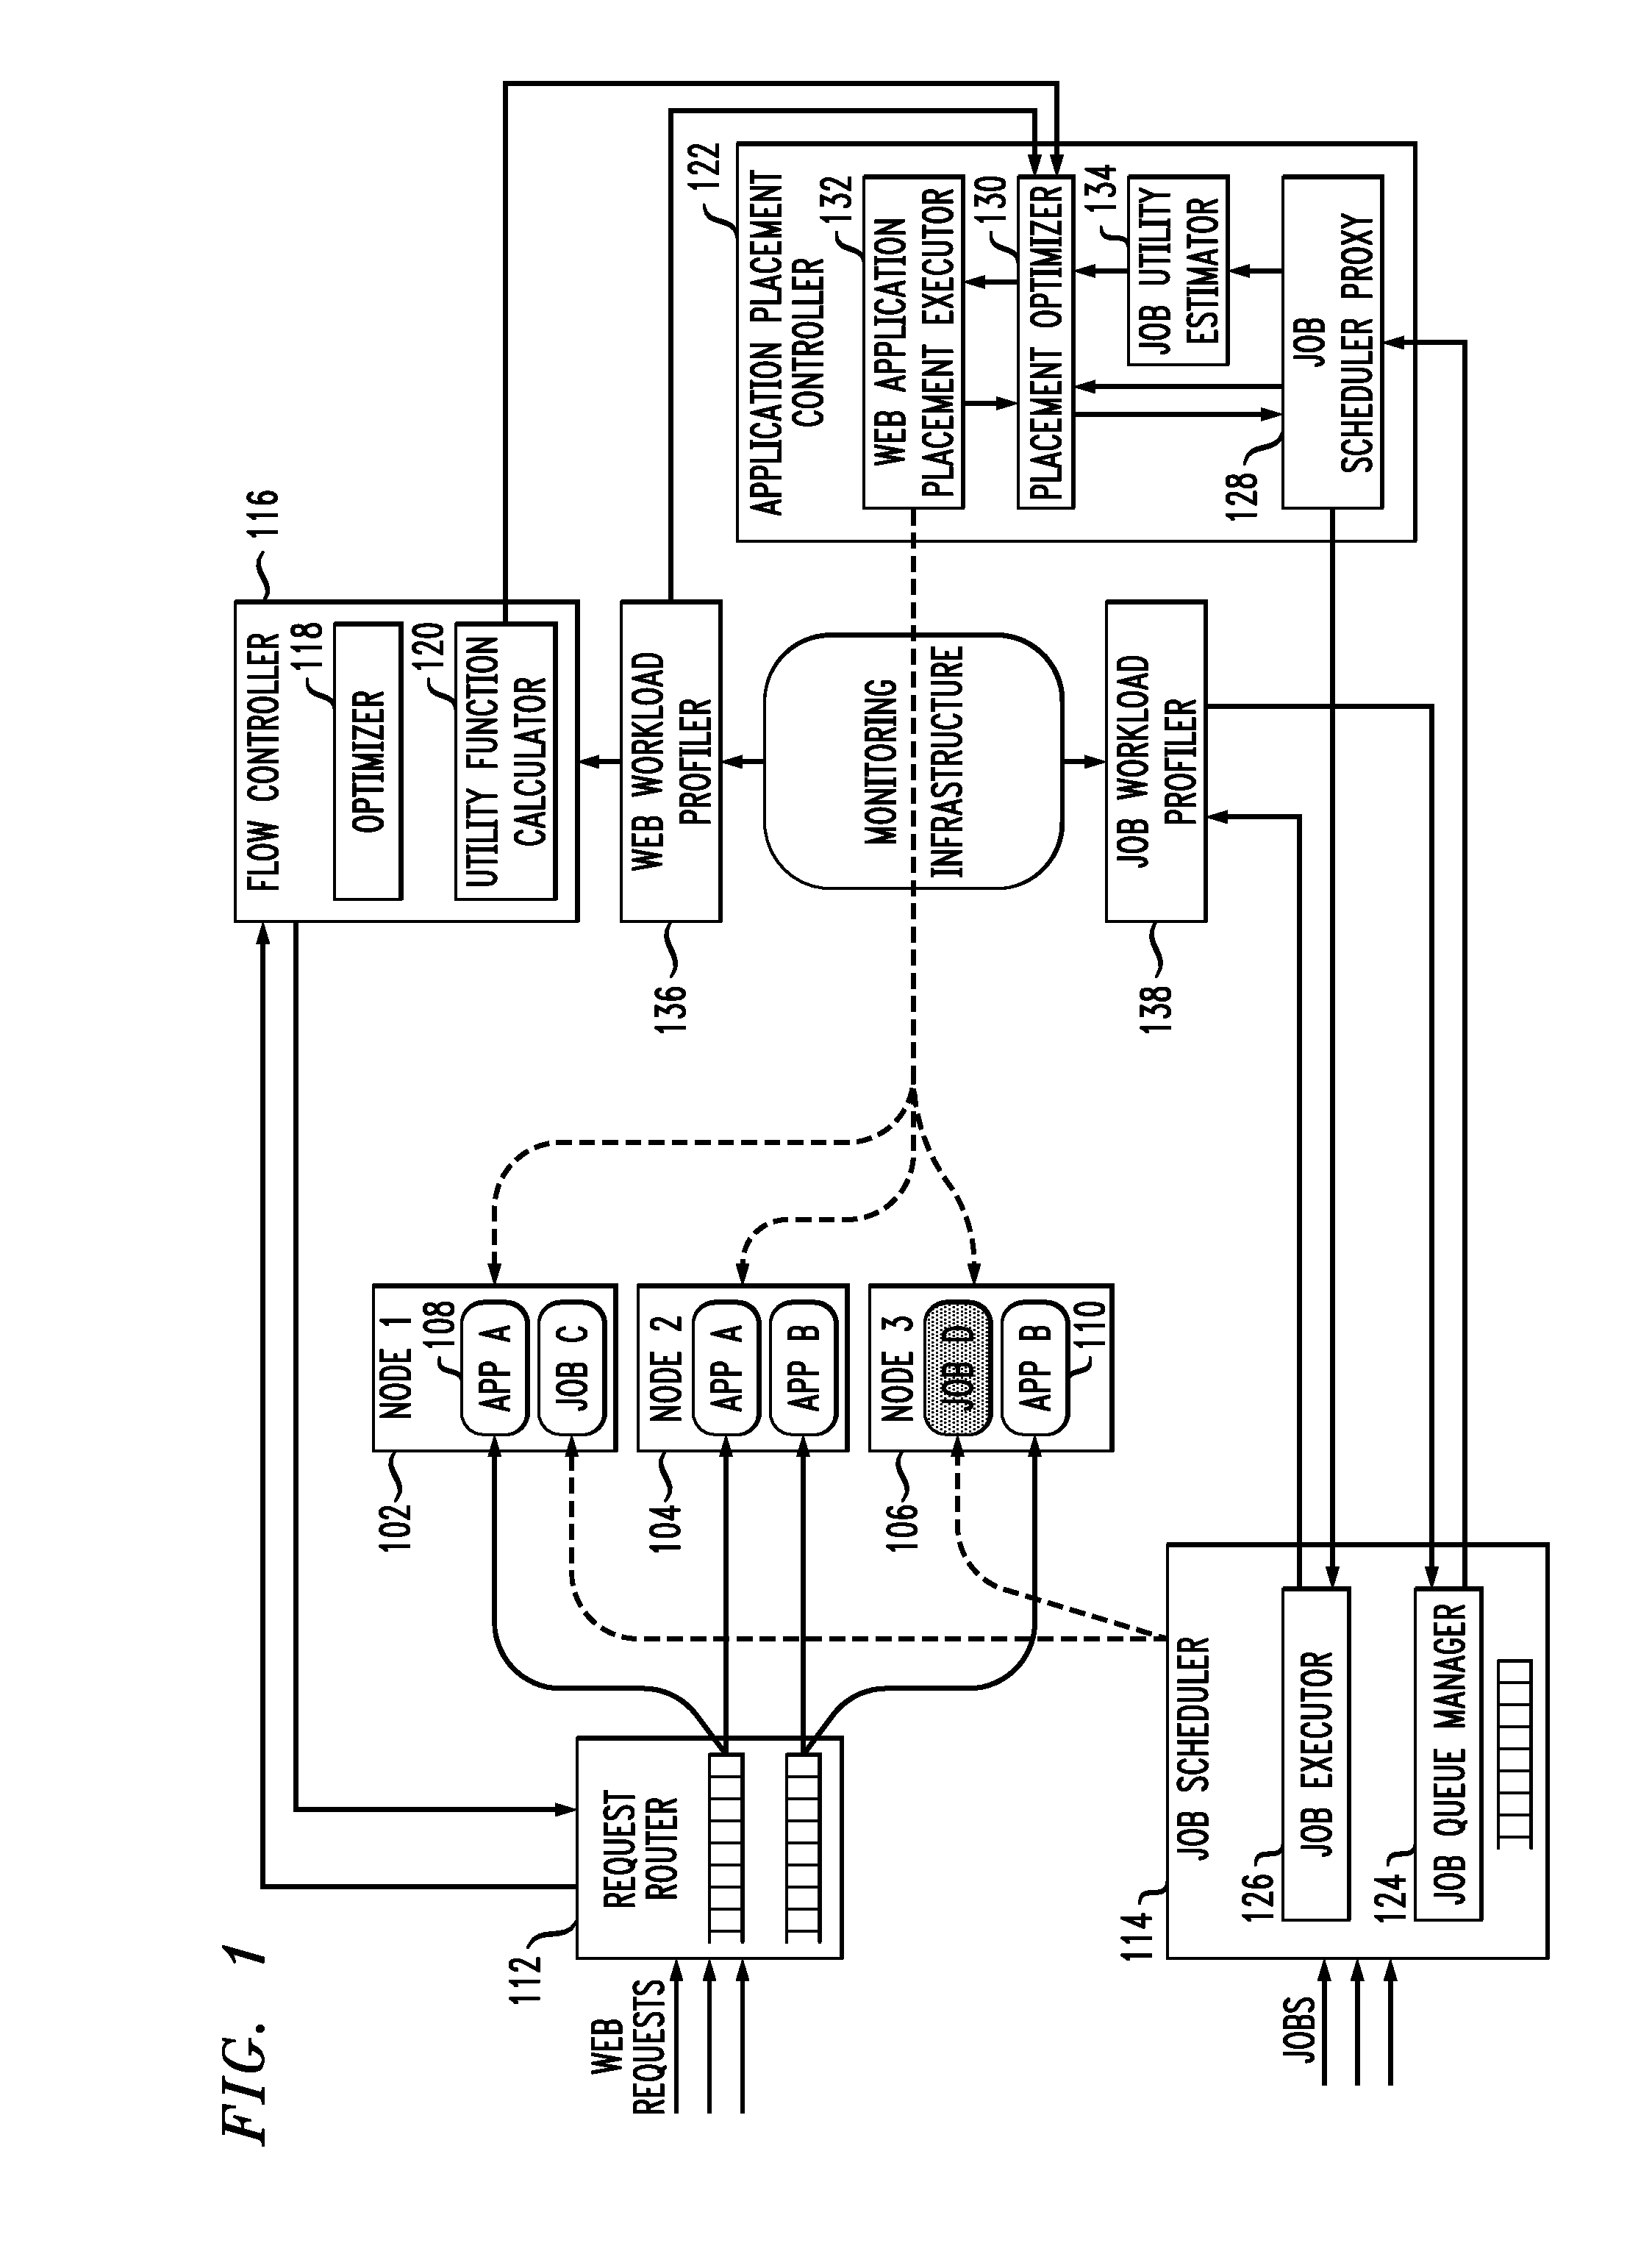 Methods and apparatus for dynamic placement of heterogeneous workloads